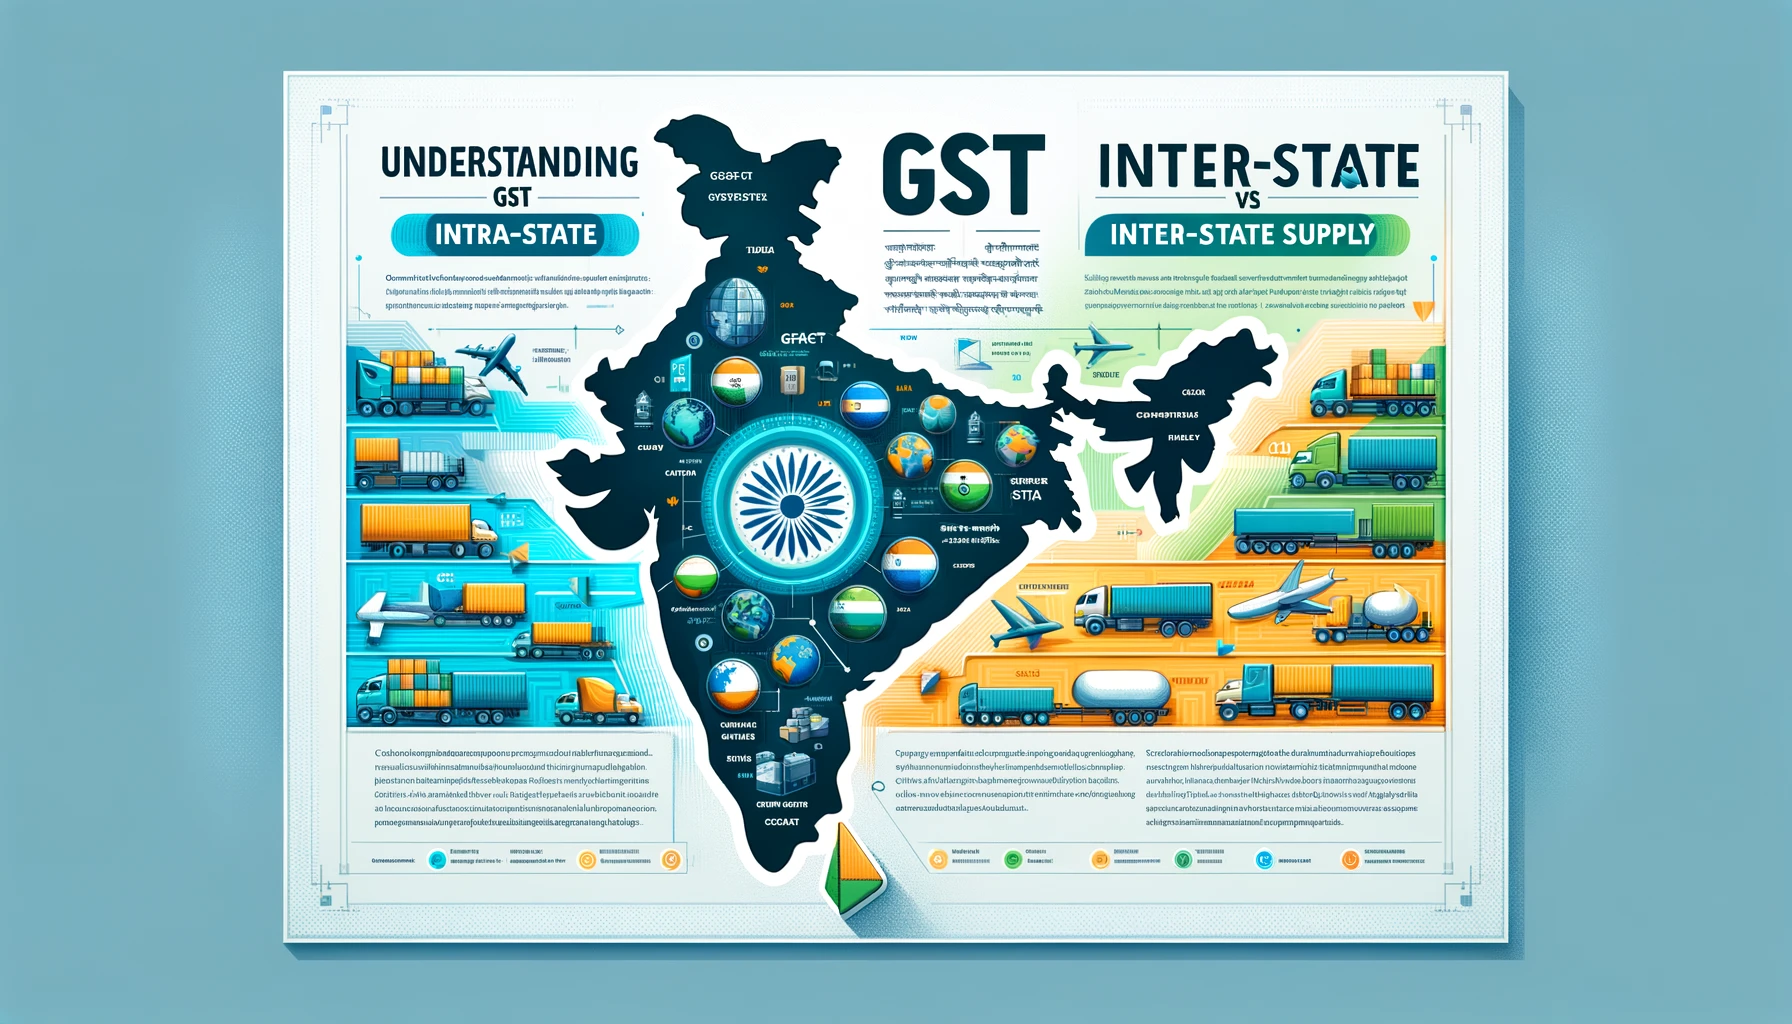 The image displays an informative banner for a blog post on GST in India, titled 